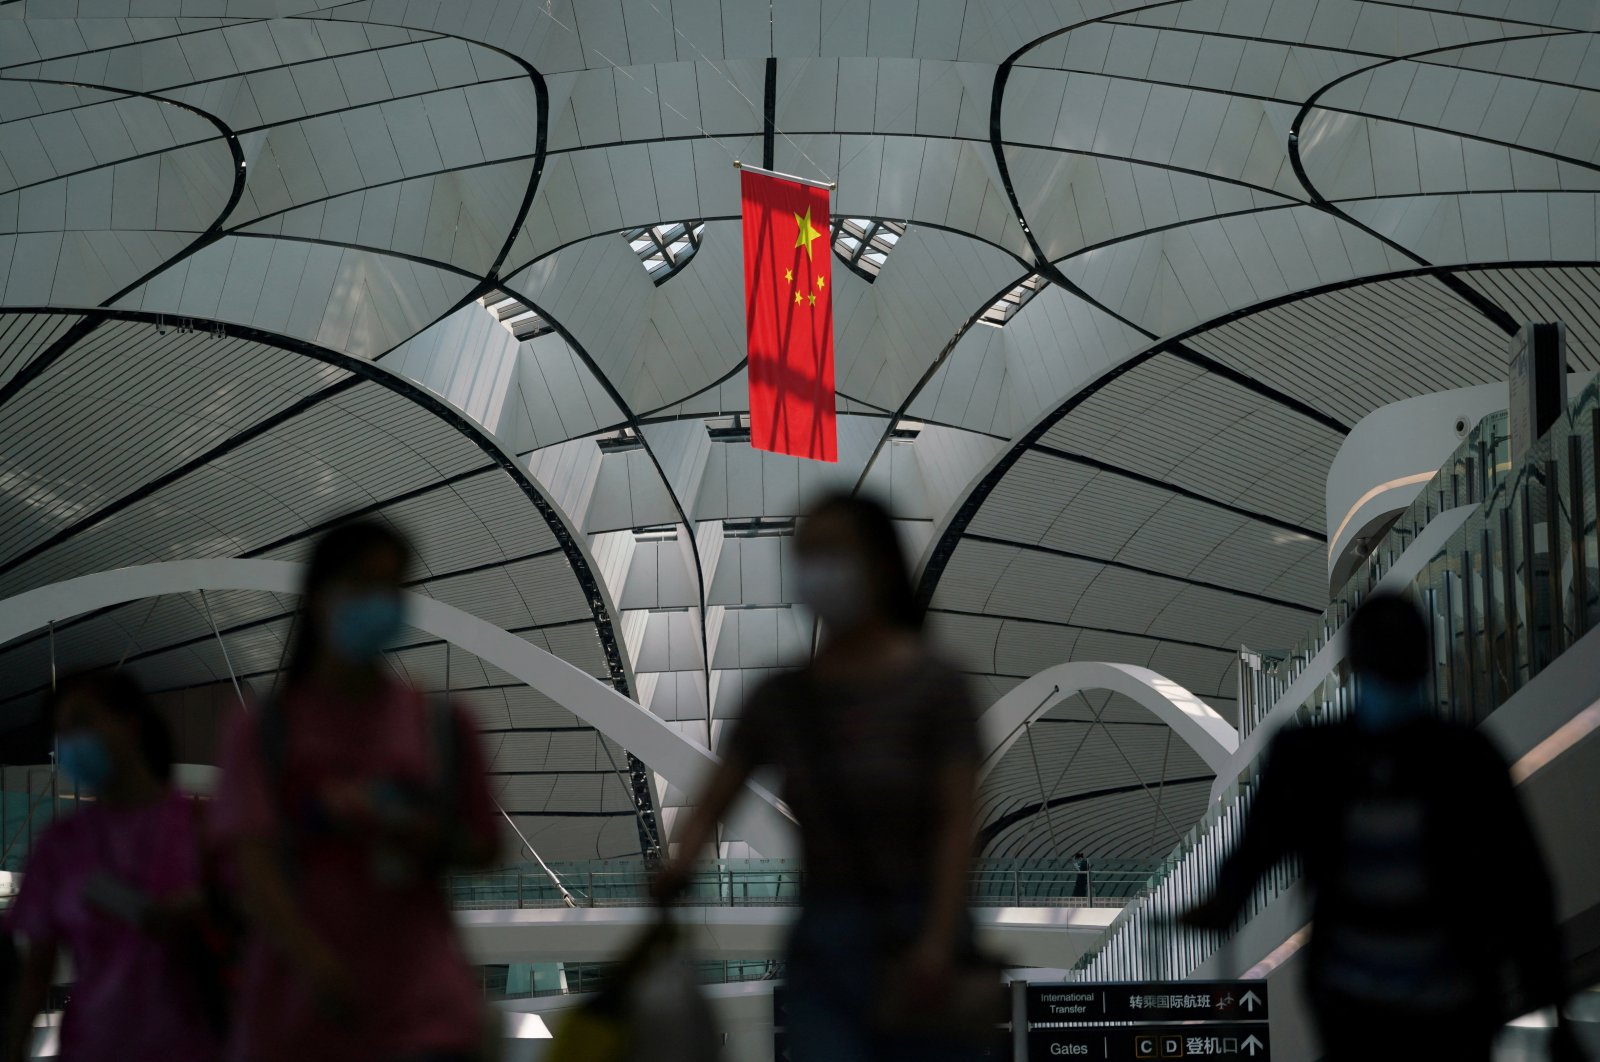 People wearing face masks following the coronavirus disease (COVID-19) outbreak walk under a Chinese flag at Beijing Daxing International Airport in Beijing, China, July 24, 2020. (Reuters Photo)